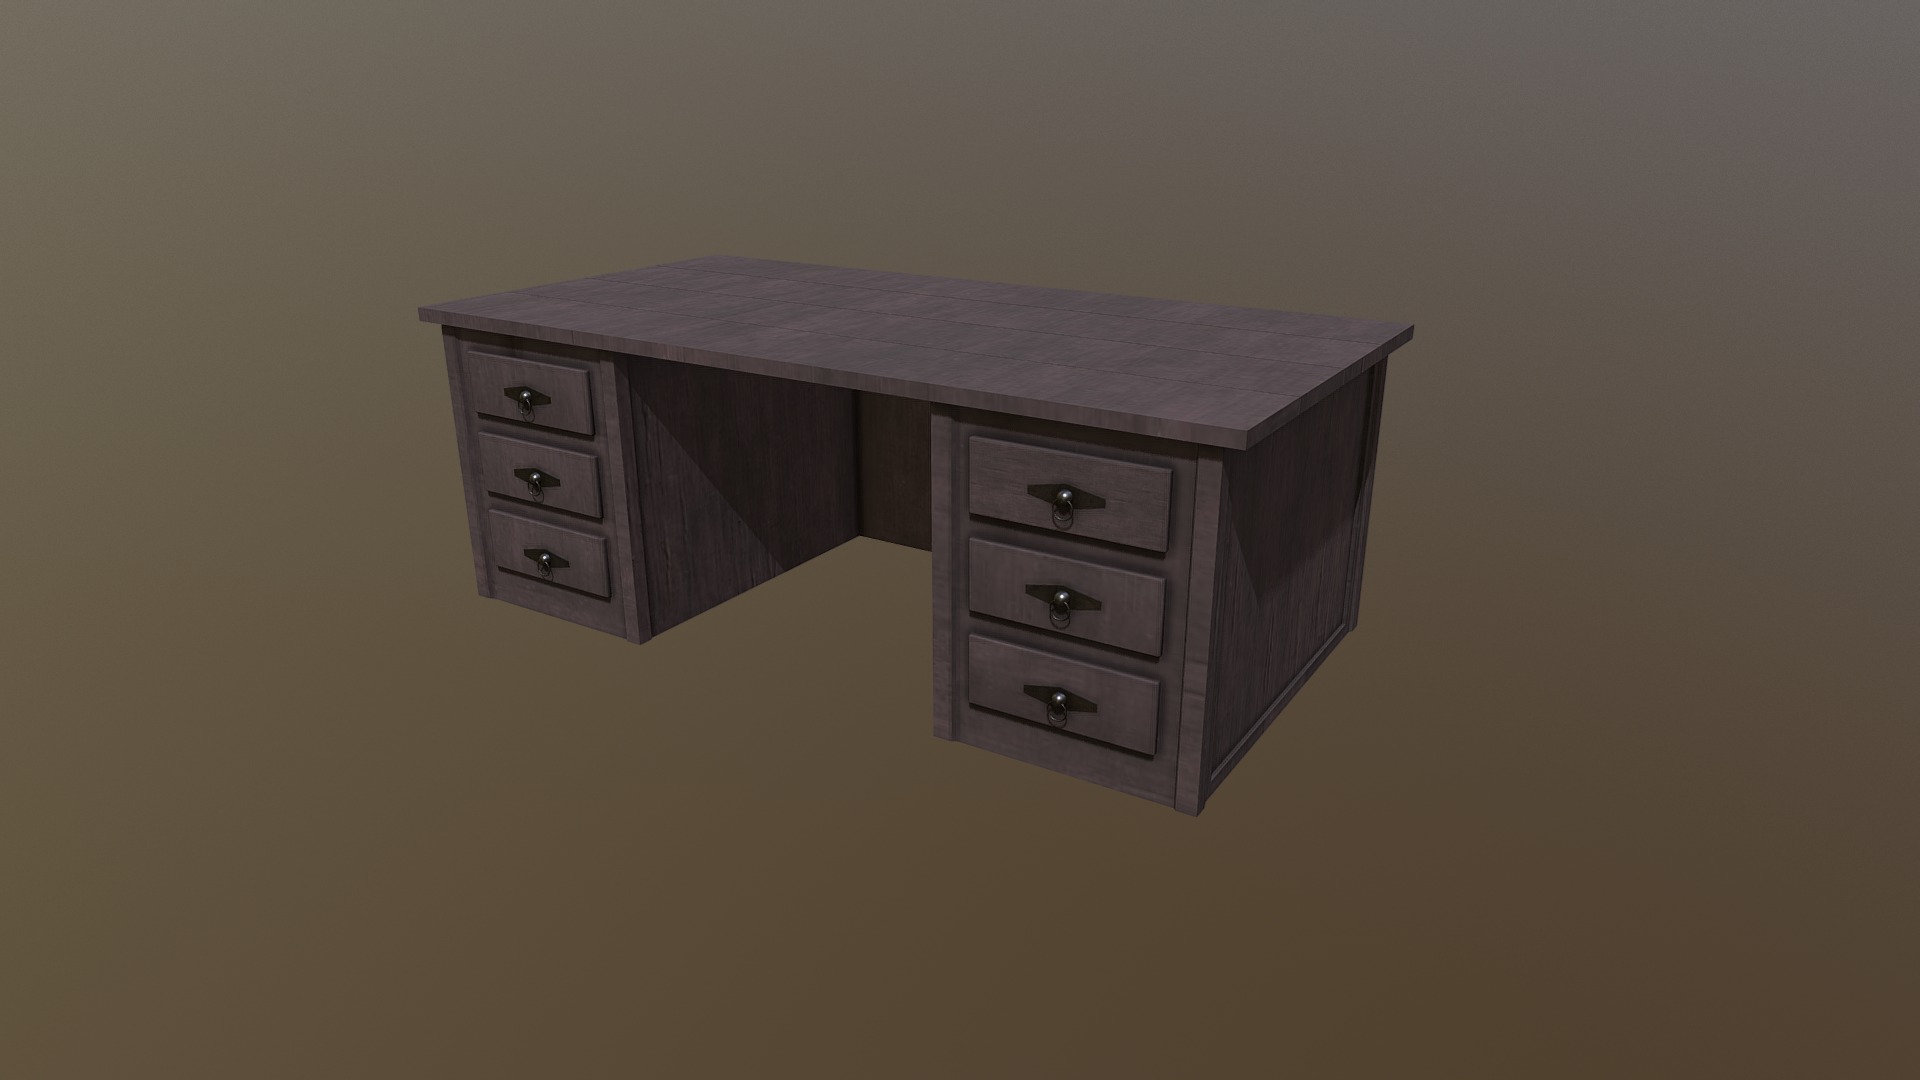 3D model Rustic Medieval House Asset – Desk (Animated) - This is a 3D model of the Rustic Medieval House Asset - Desk (Animated). The 3D model is about a wooden cabinet with drawers.